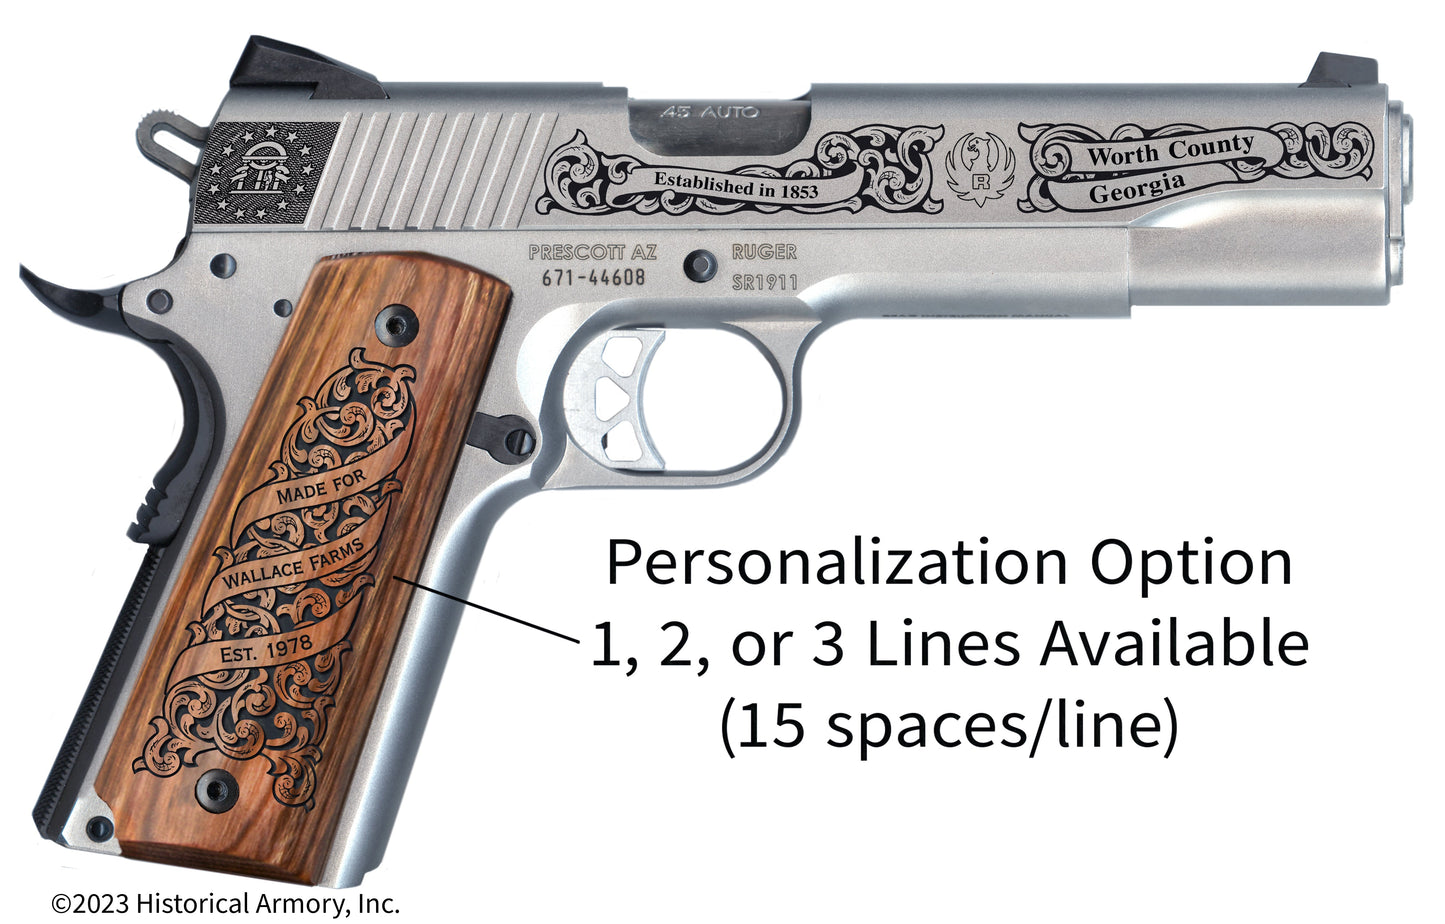 Worth County Georgia Personalized Engraved .45 Auto Ruger 1911